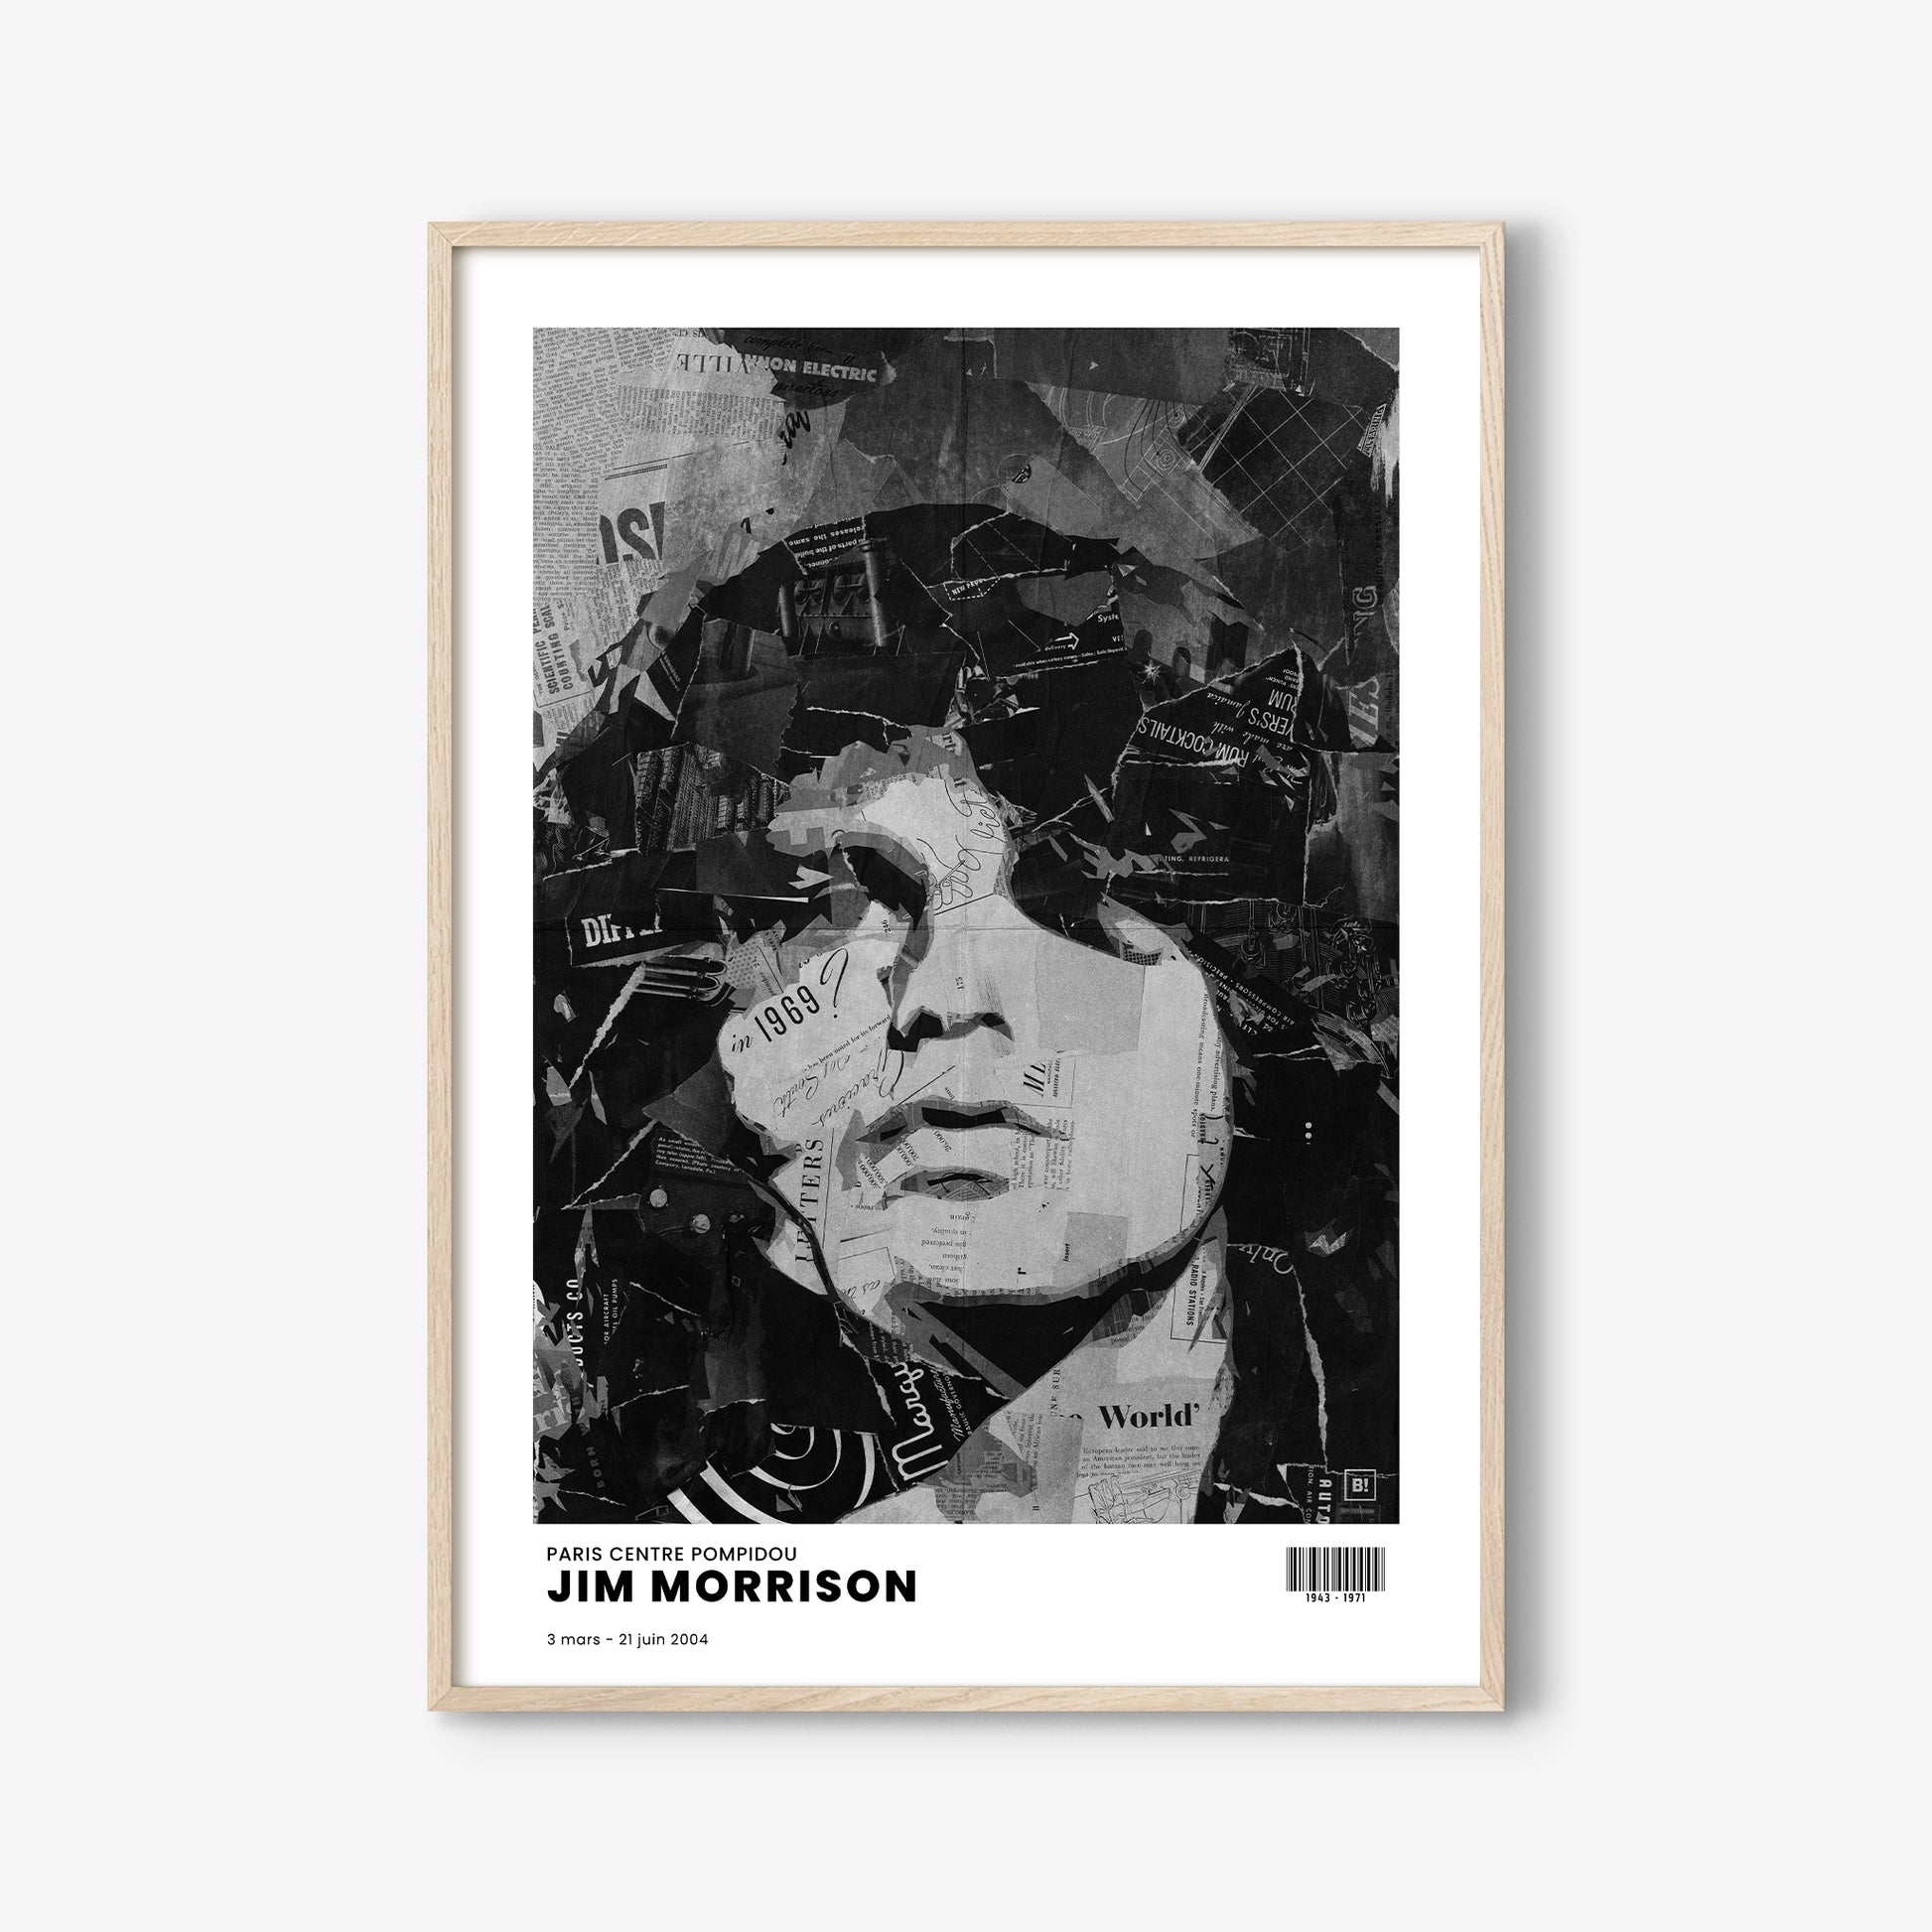 Be inspired by Iconic Jim Morrison Paris Centre Pompidou Exhibition Art Print. The artwork is presented in a white oak frame that captures its timeless beauty in every detail.